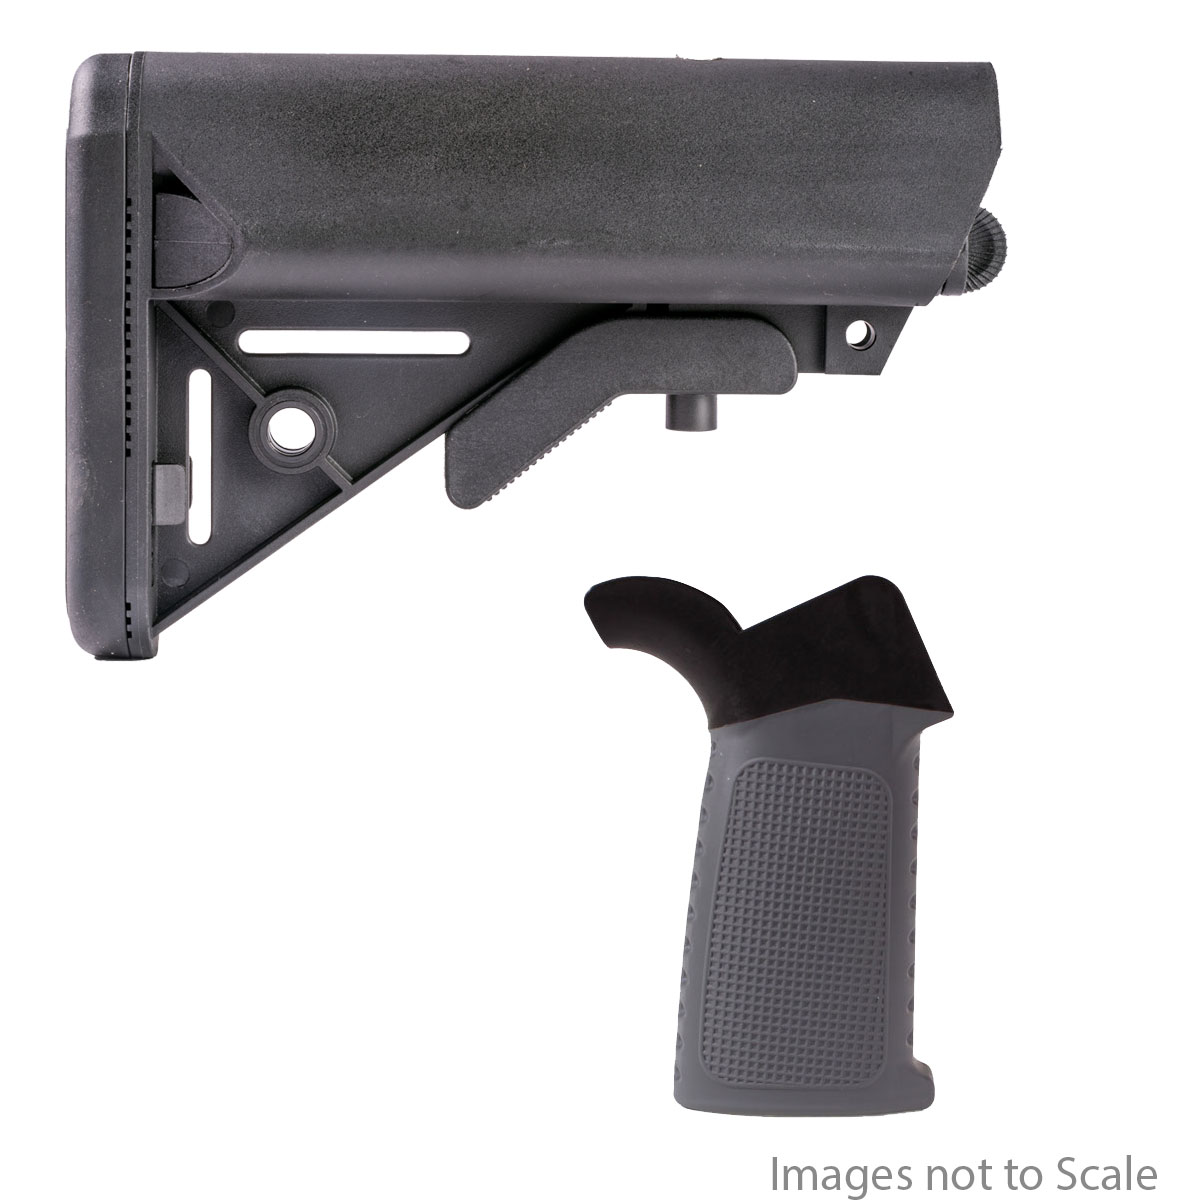 Furniture Upgrade Kit: Team Accessories Corp Grid Grip Flared Texture (gray)  + Gauntlet Arms SOPMOD Style Collapsible Stock with Storage Compartments